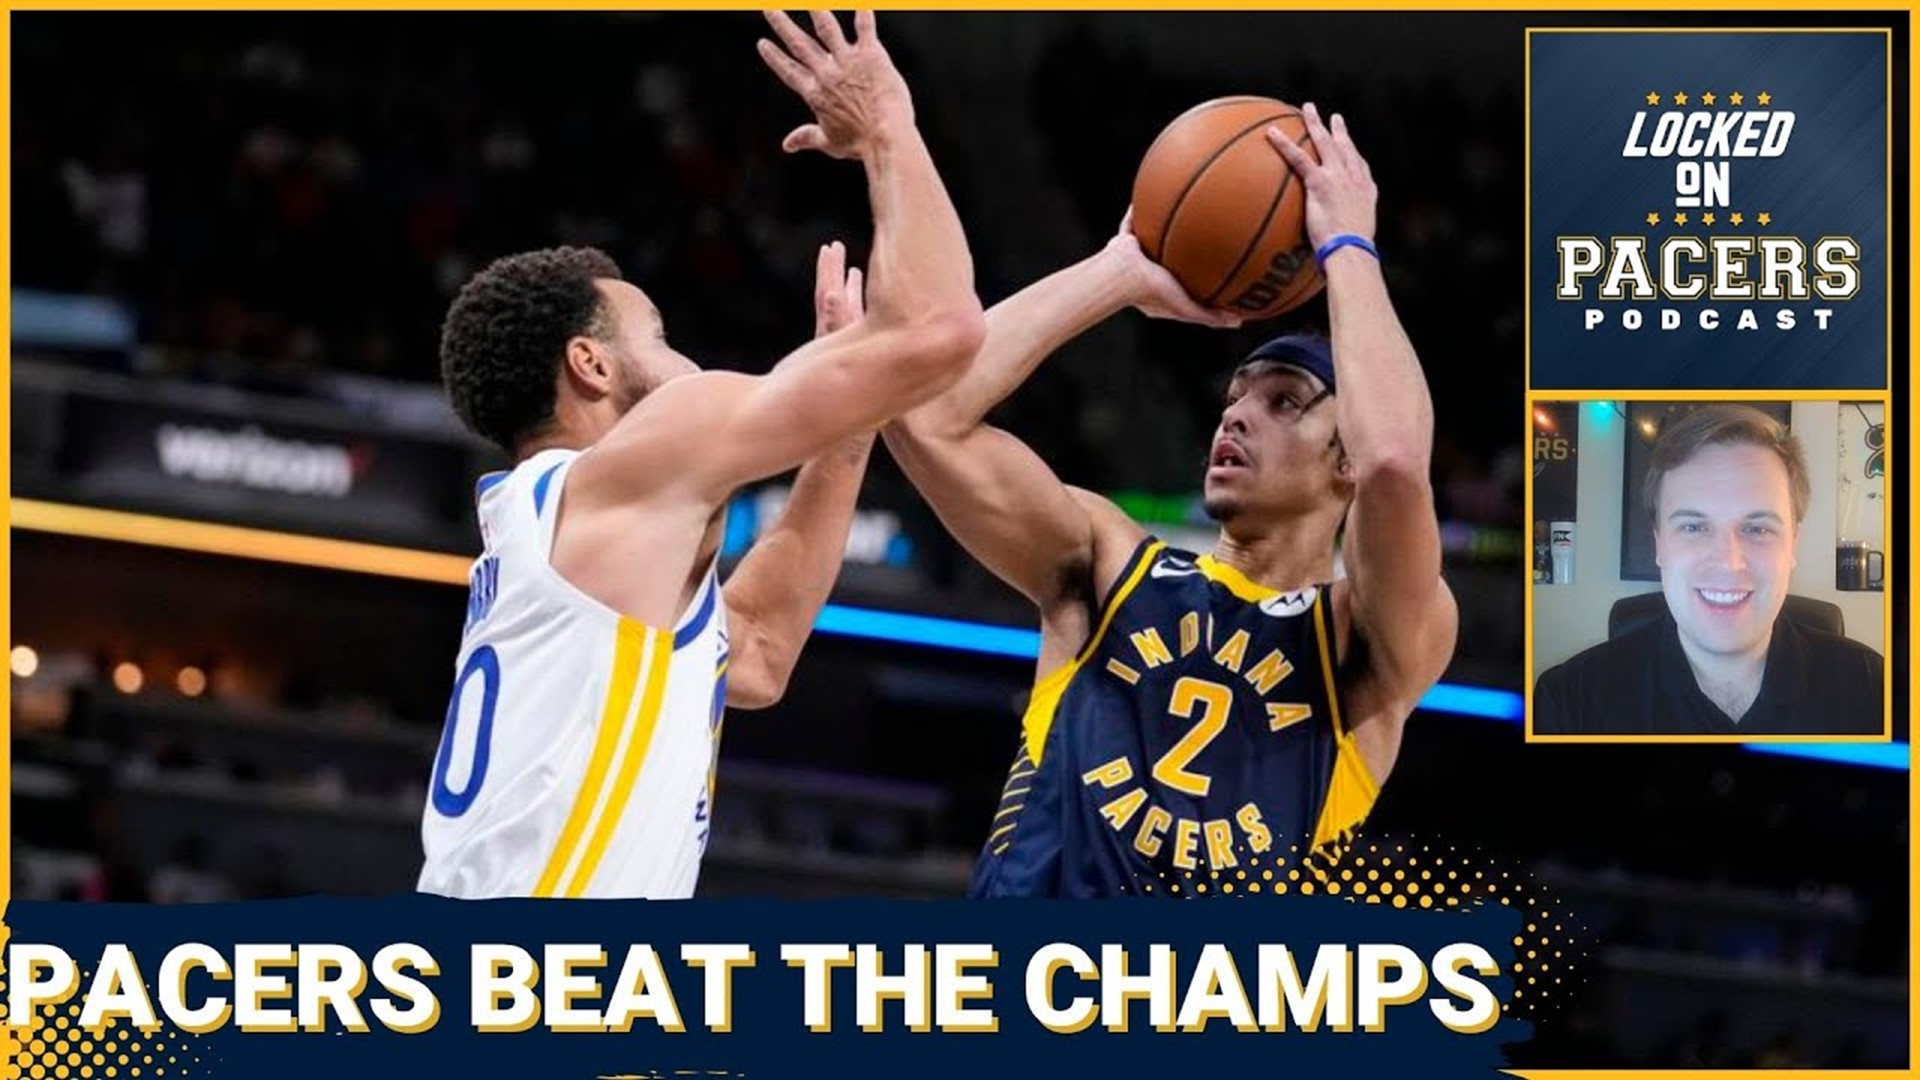 Indiana Pacers defeat the defending champion Golden State Warriors again + NBA trade season begins kagstv